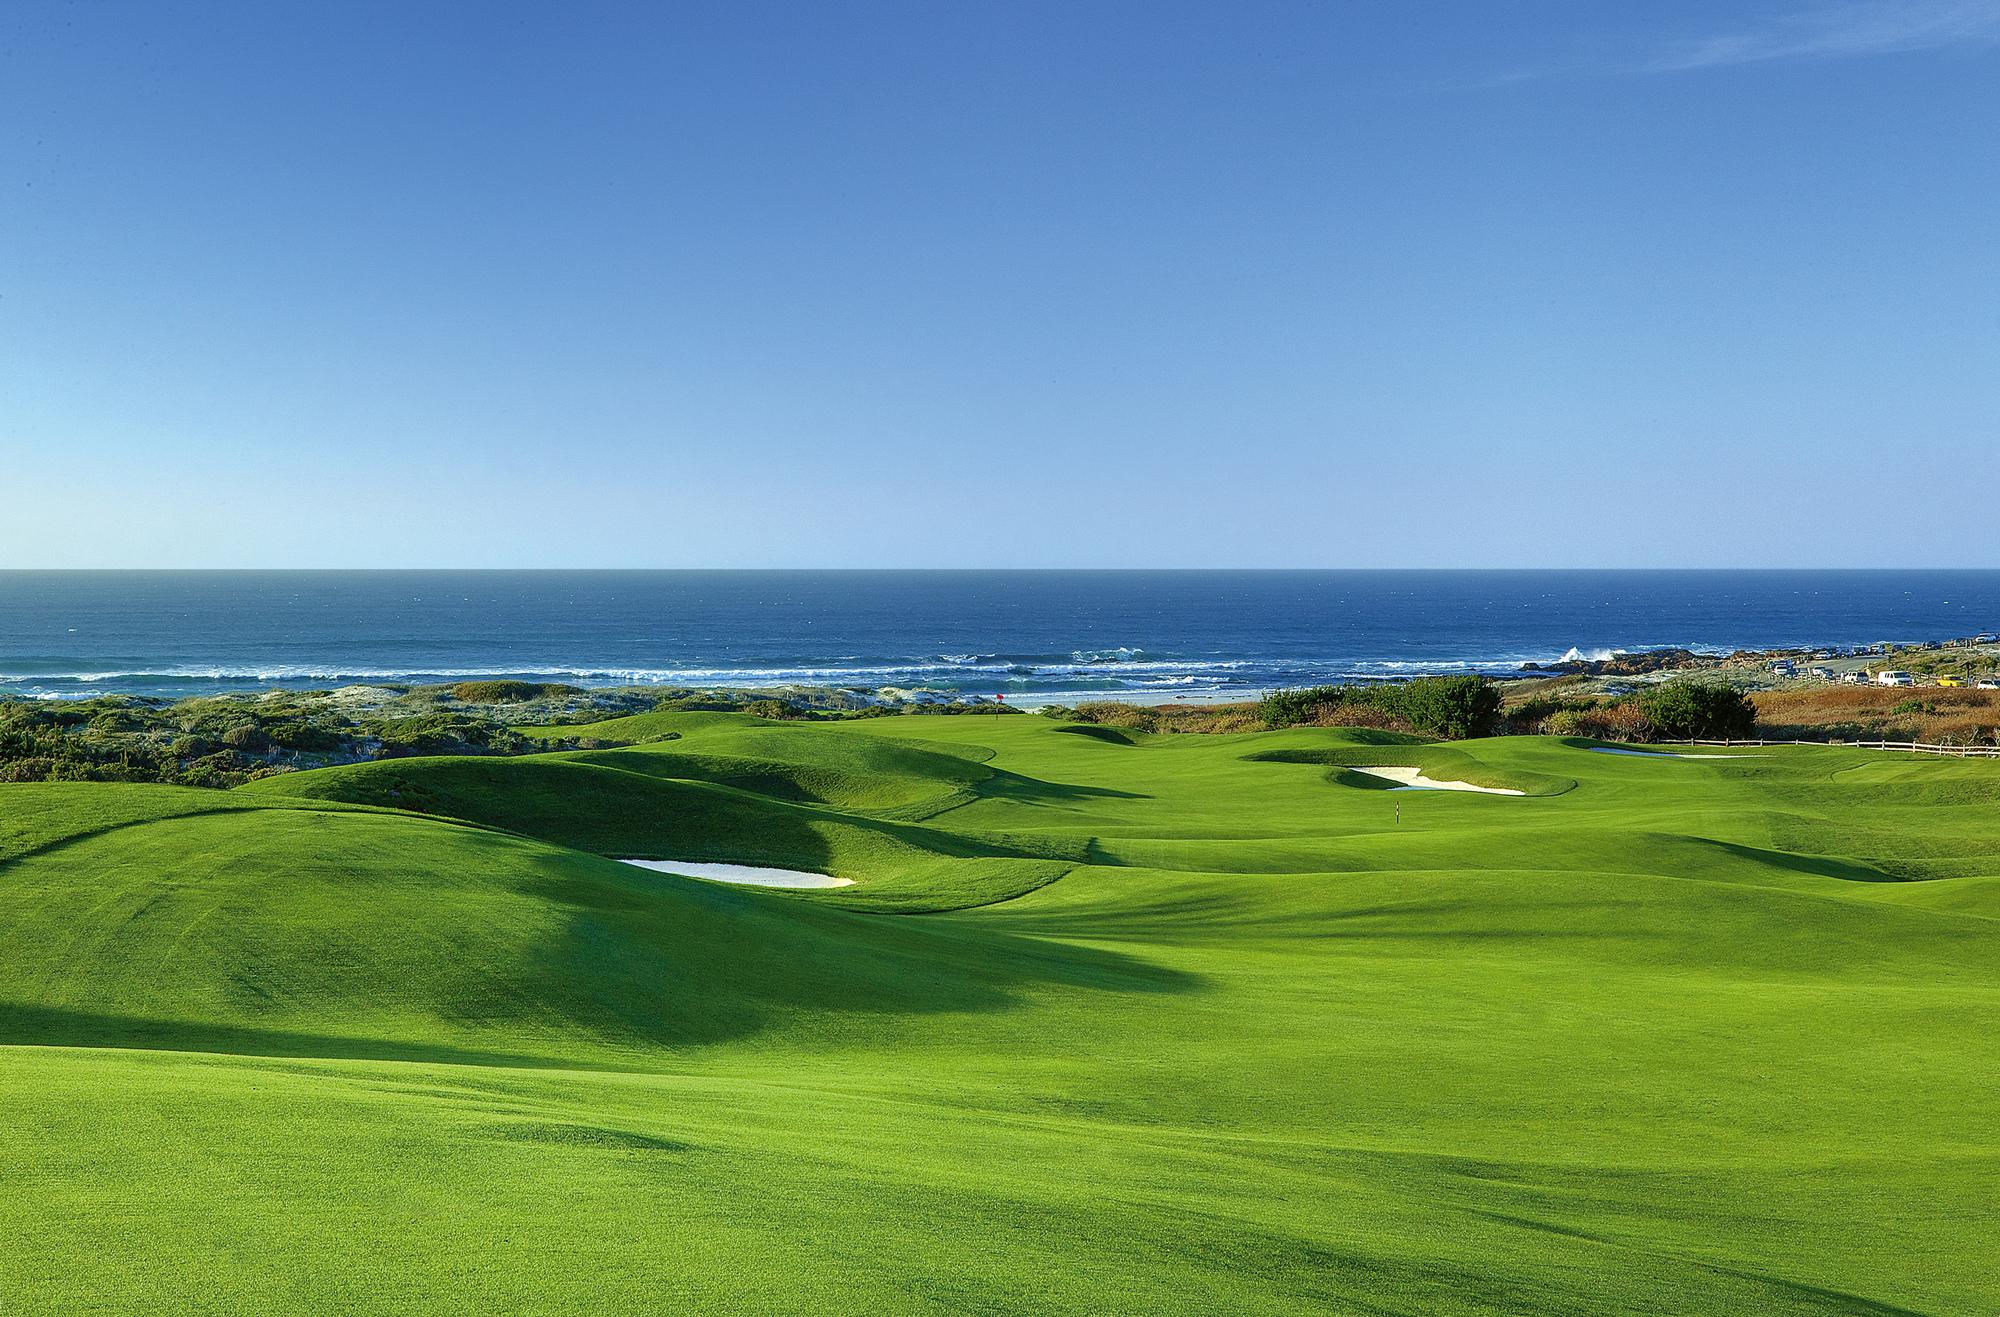 The Links at Spanish Bay offers several of the most desirable golf course within California